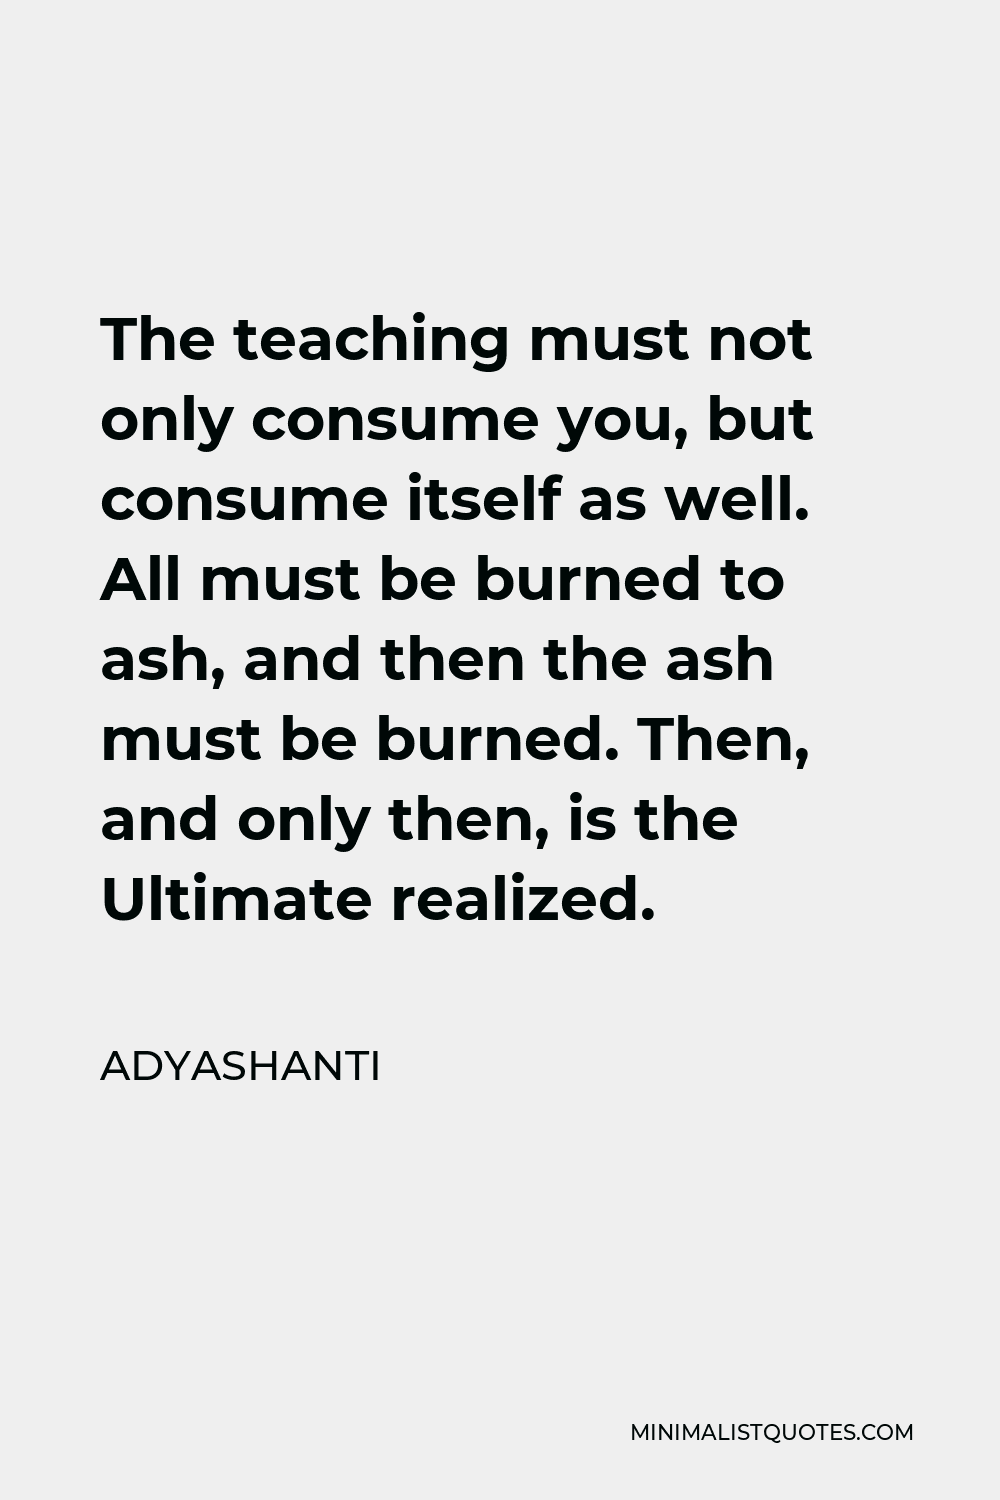 Adyashanti Quote - The teaching must not only consume you, but consume itself as well. All must be burned to ash, and then the ash must be burned. Then, and only then, is the Ultimate realized.